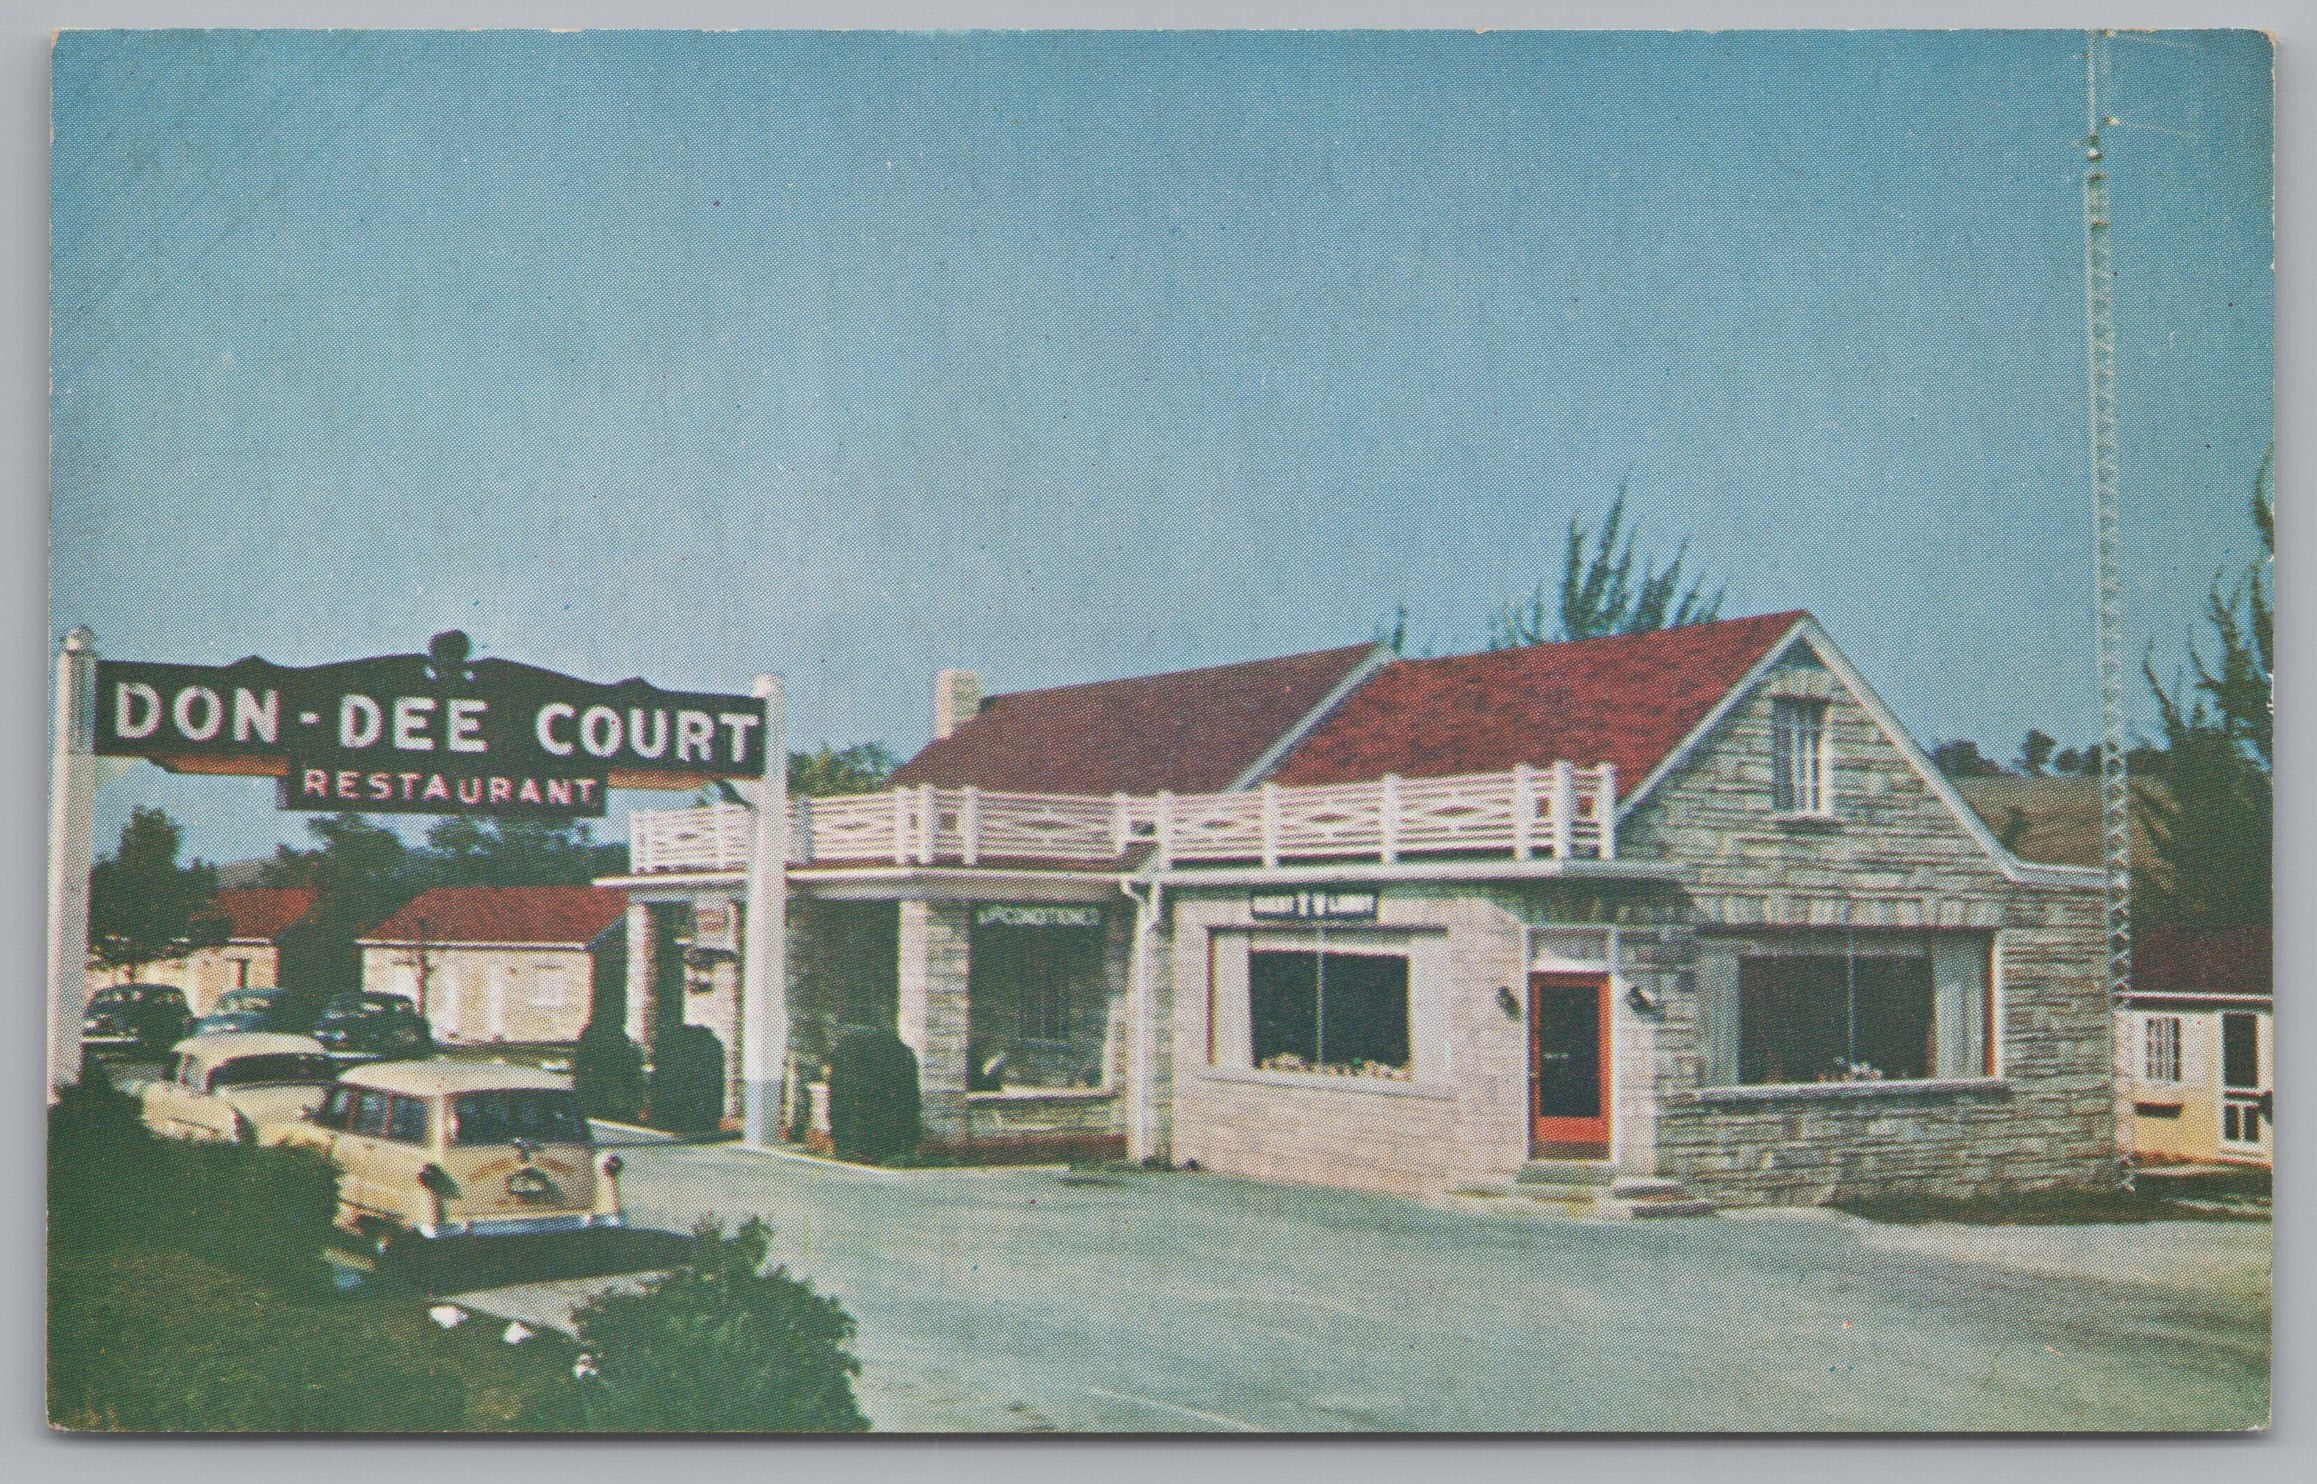 Don Dee Court And Restaurant, Virginia, Vintage Post Card.